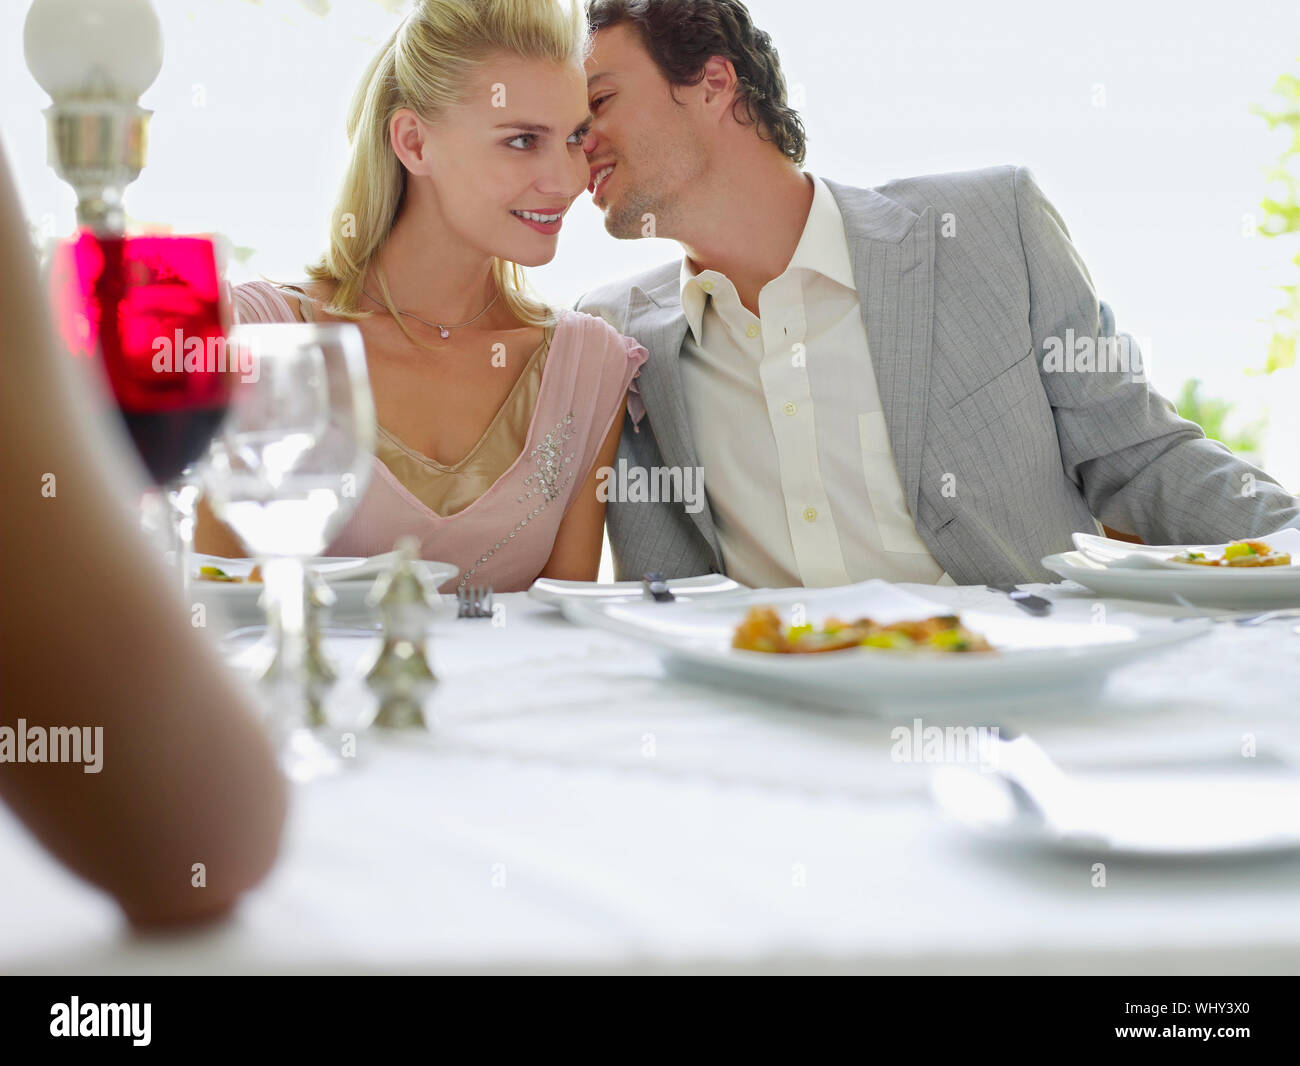 Young man whispering into woman's ear at dinner party Stock Photo